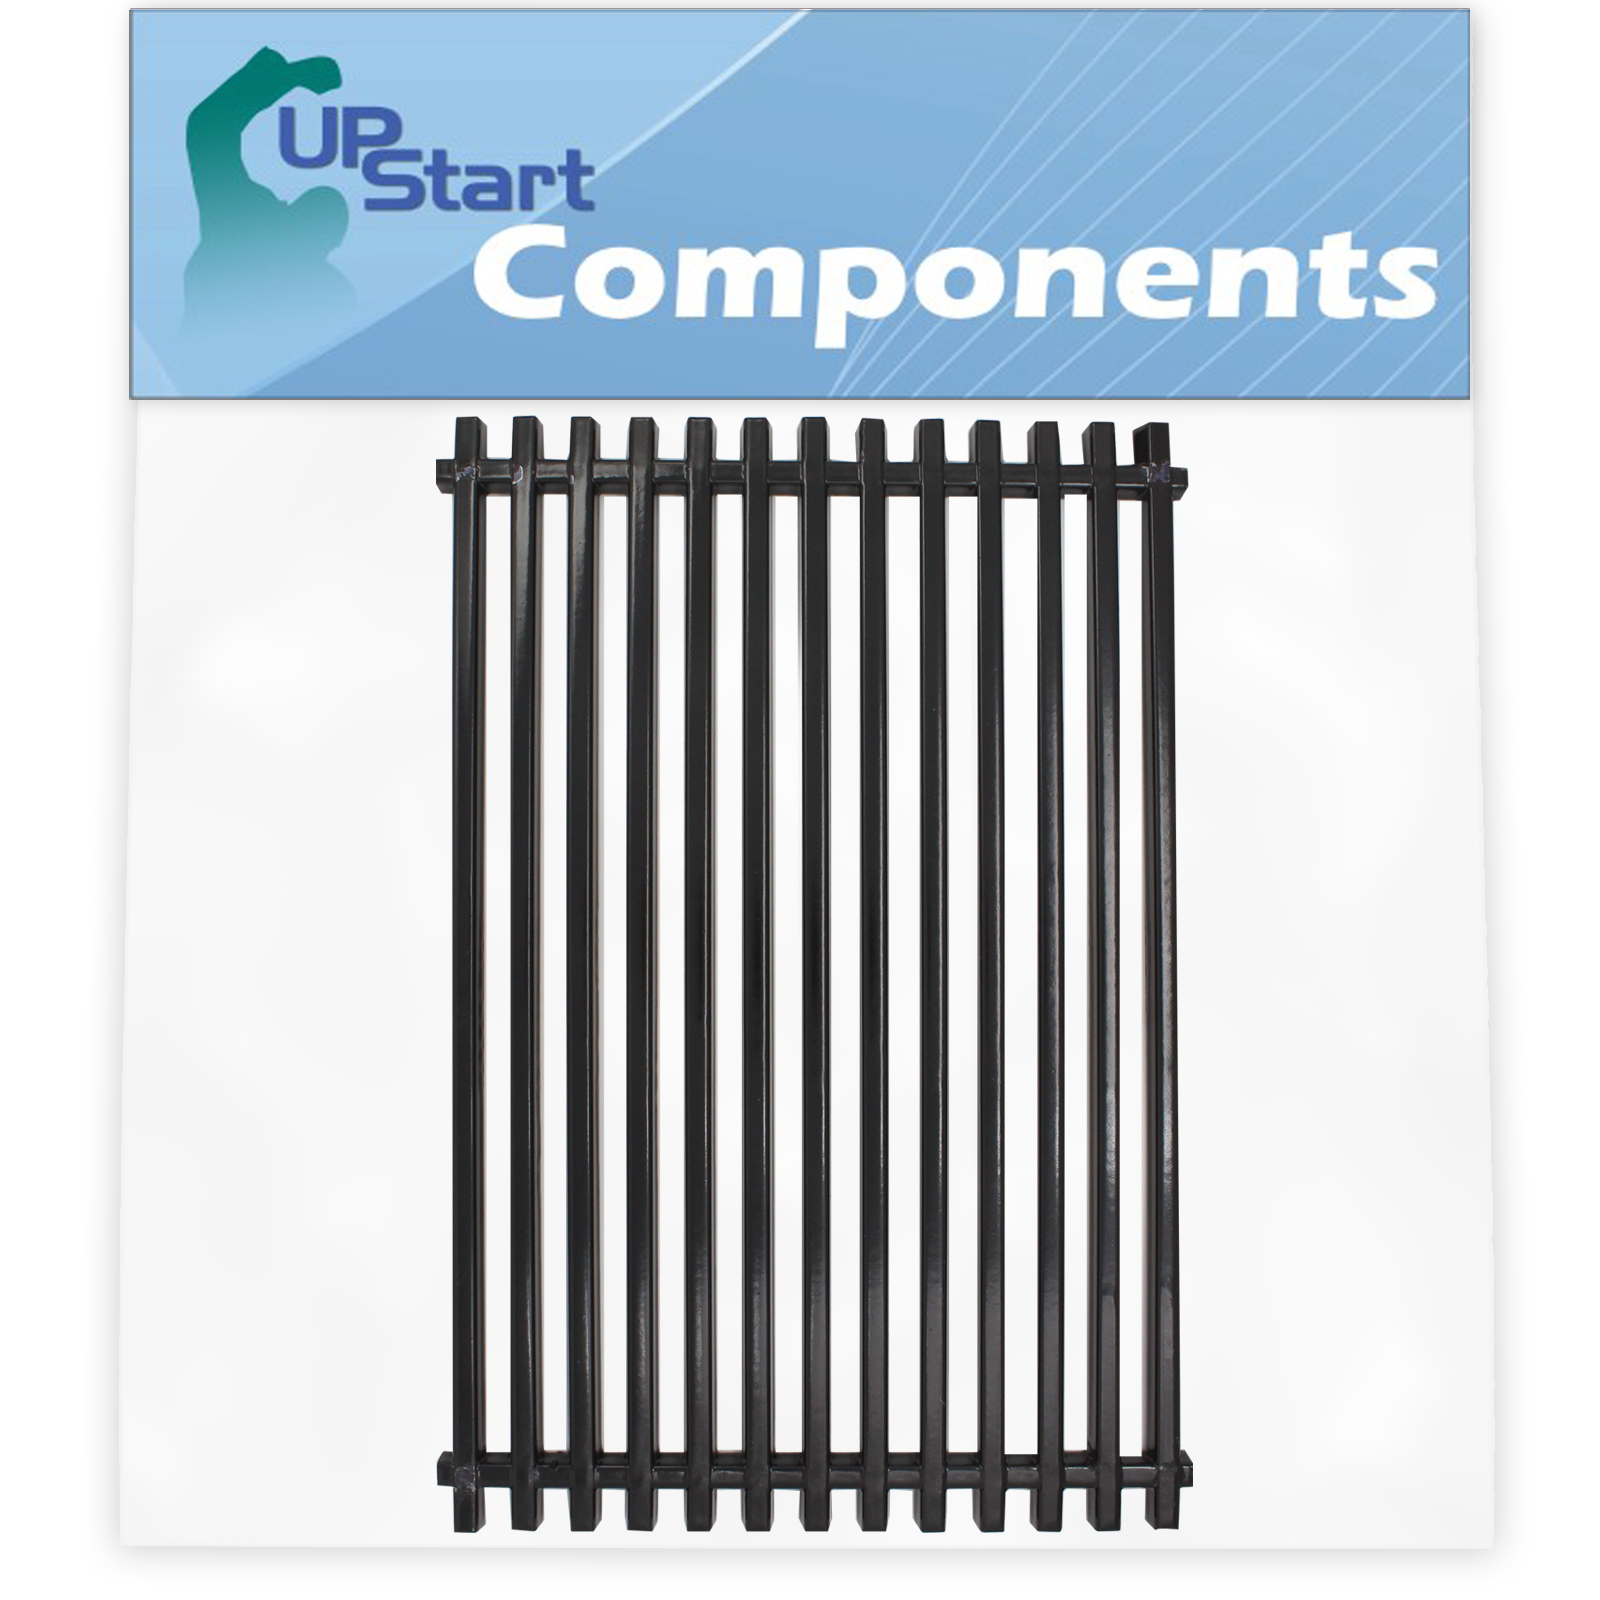 BBQ Grill Cooking Grates Replacement Parts for Weber Spirit E 310, Weber Genesis Silver B, Weber Genesis 1000, Weber Genesis Silver C - Compatible Barbeque Porcelain Coated Steel Grid 17 3/4" - image 1 of 4